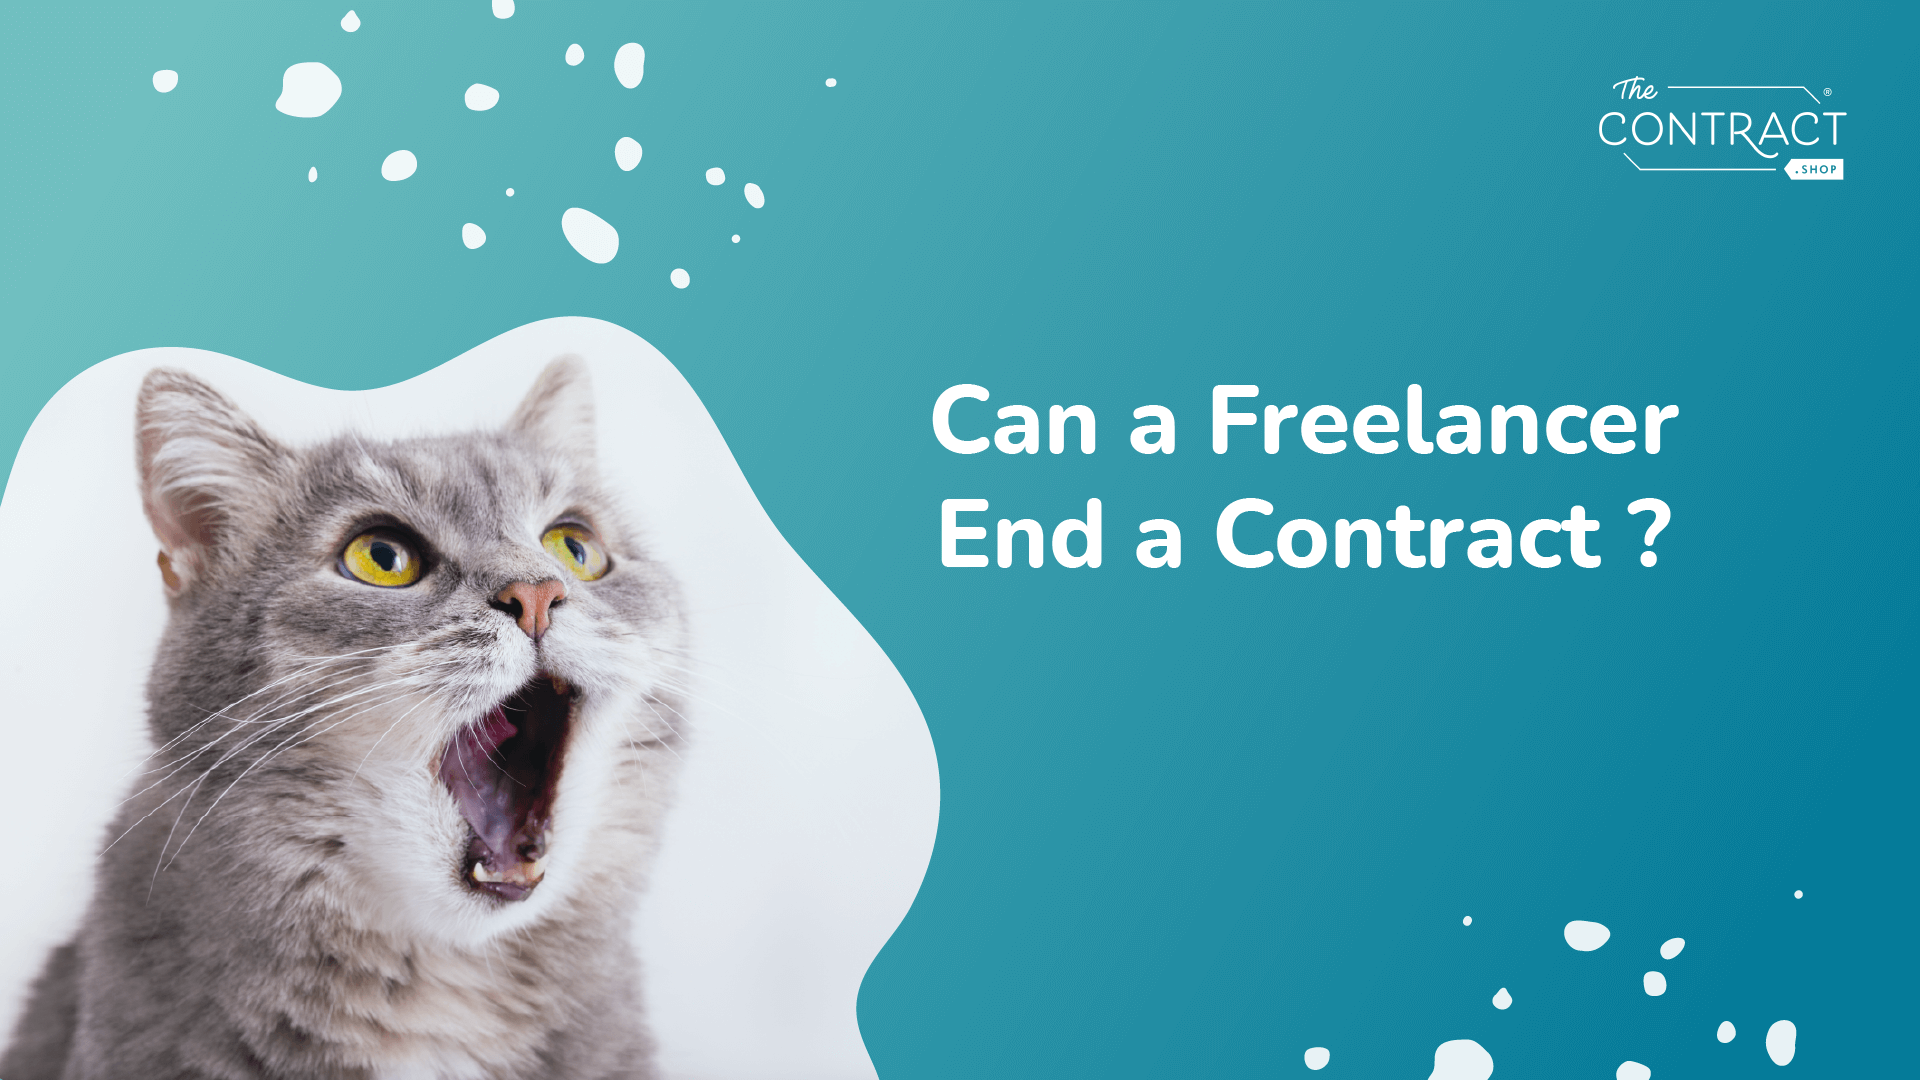 Can a Freelancer End a Contract?